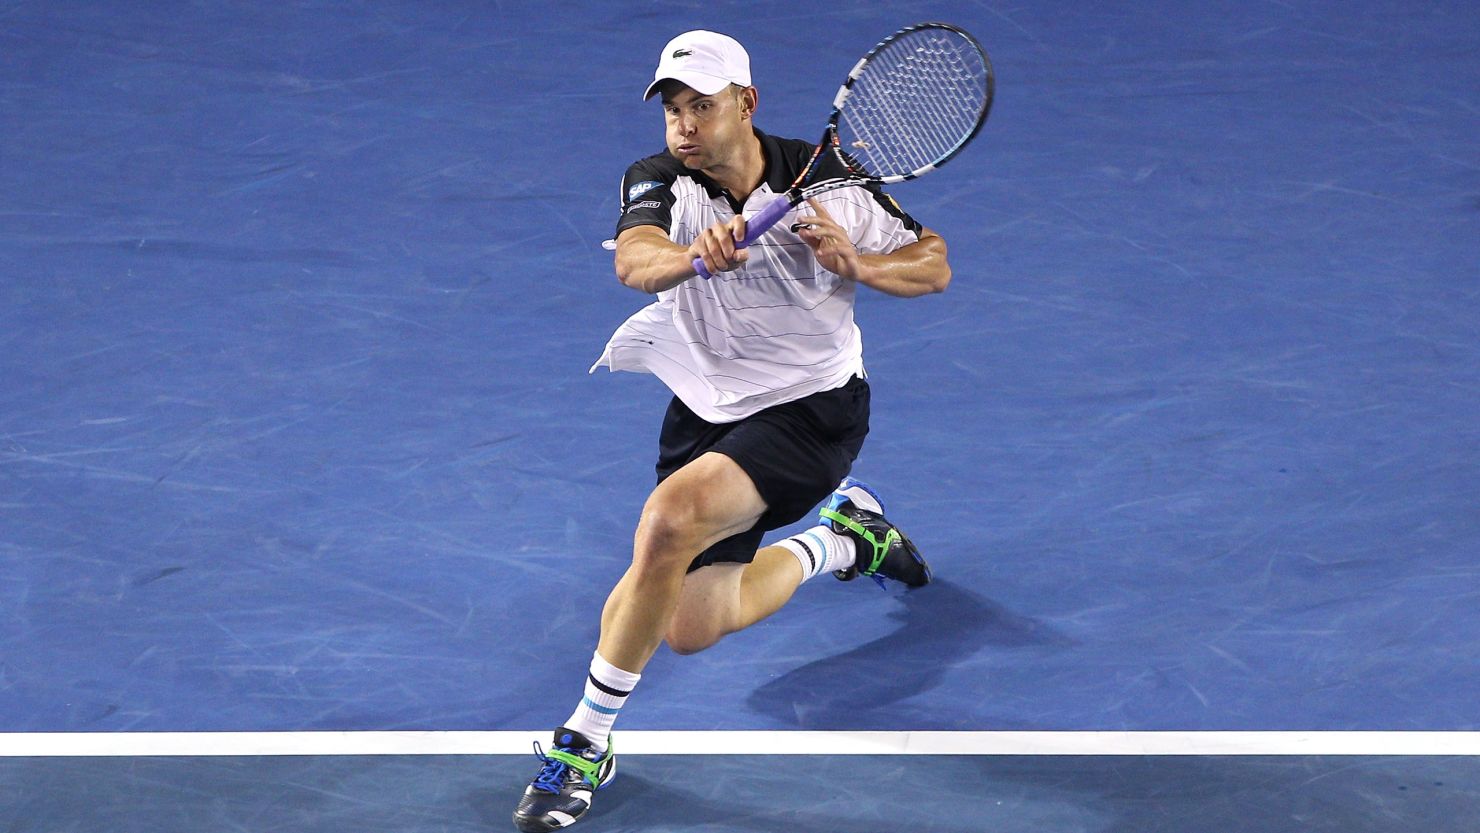 American Andy Roddick has won the SAP Open on the occasions -- in 2004, 2005 and 2008.